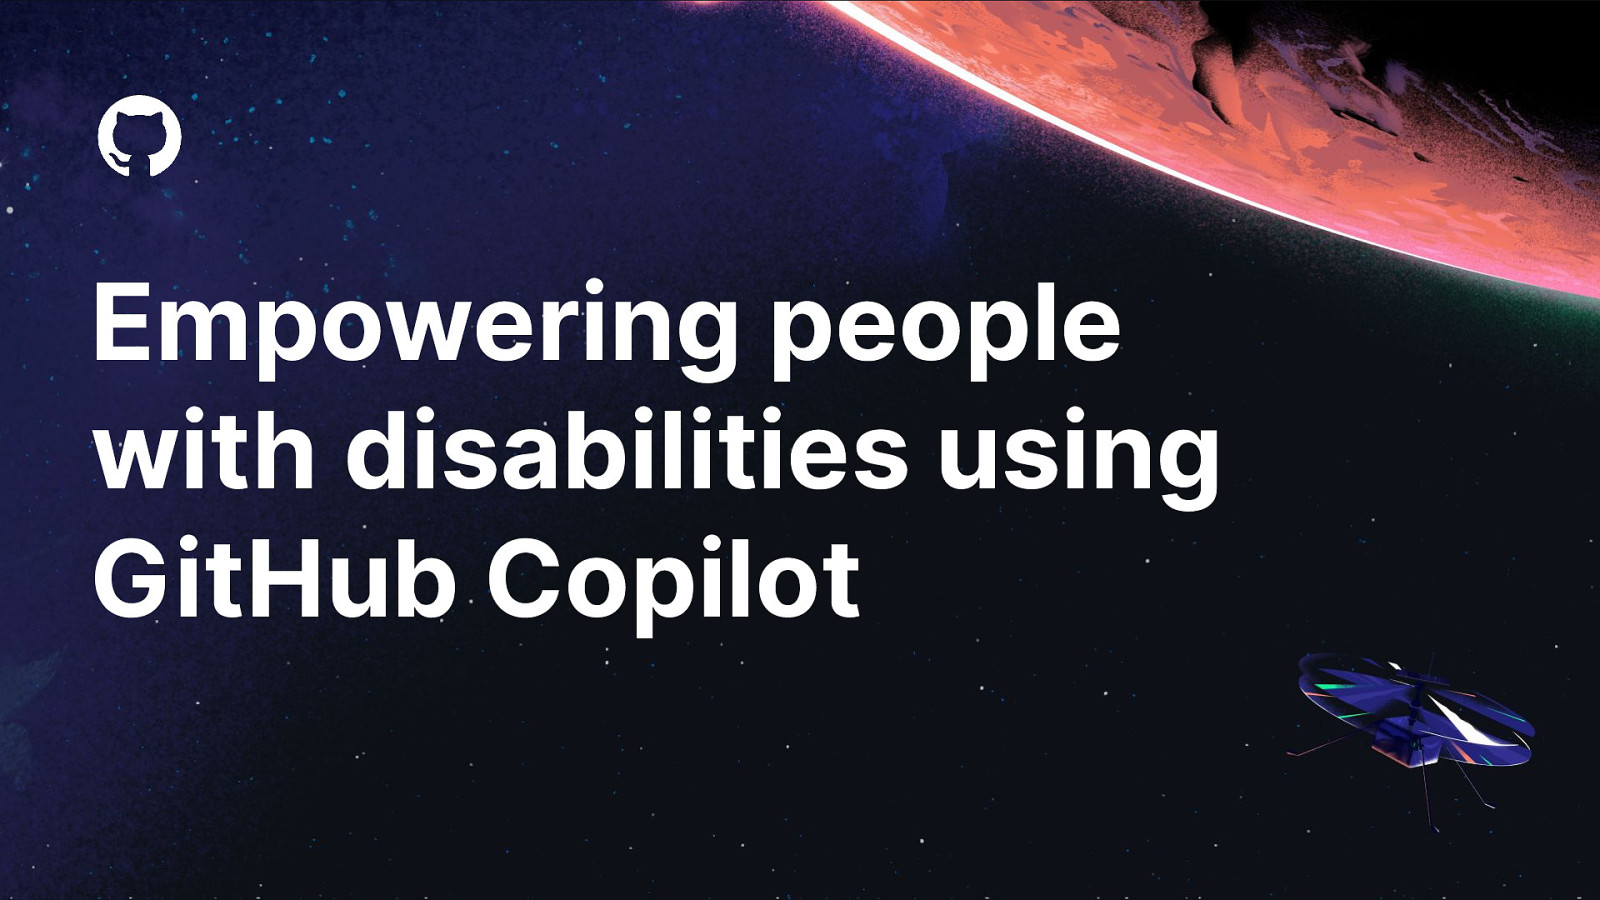 Empowering people with disabilities using GitHub Copilot